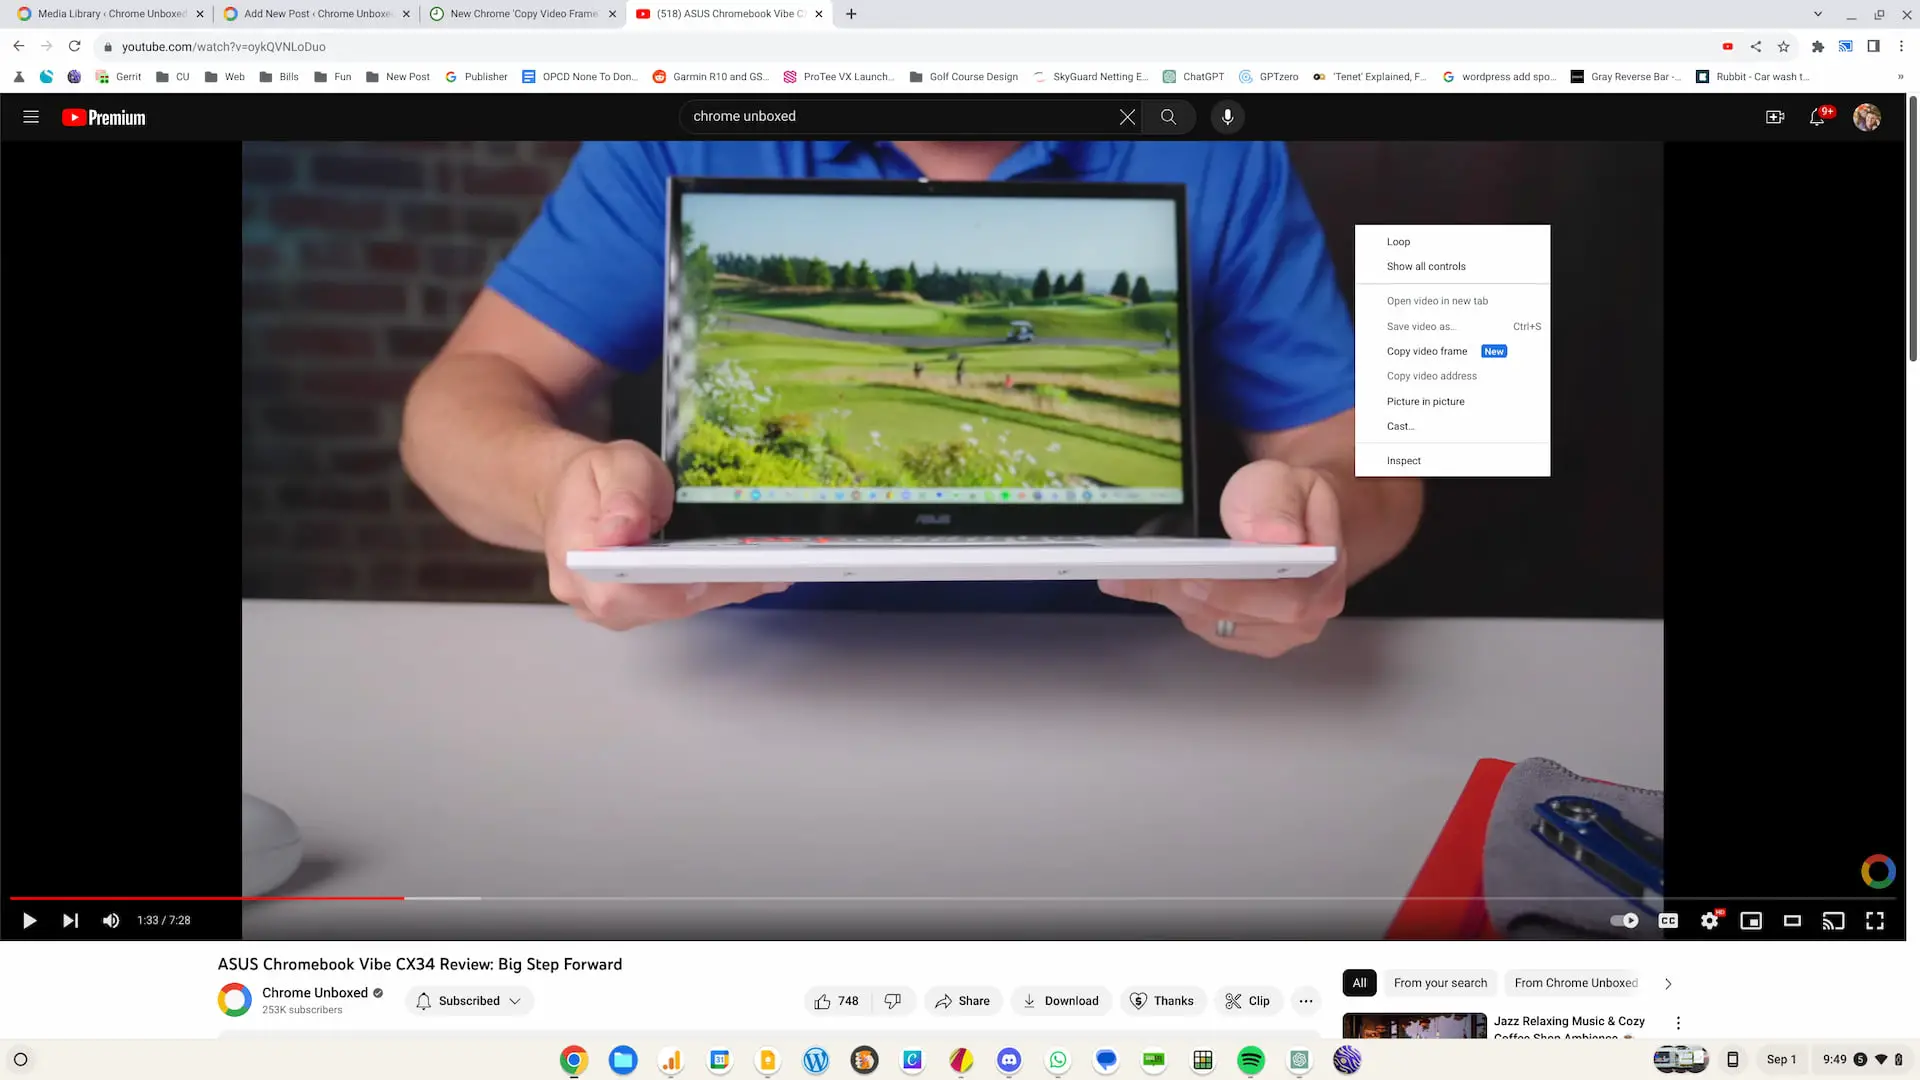 Chrome now has a ‘Copy Video Frame’ option for vastly improved video screenshots